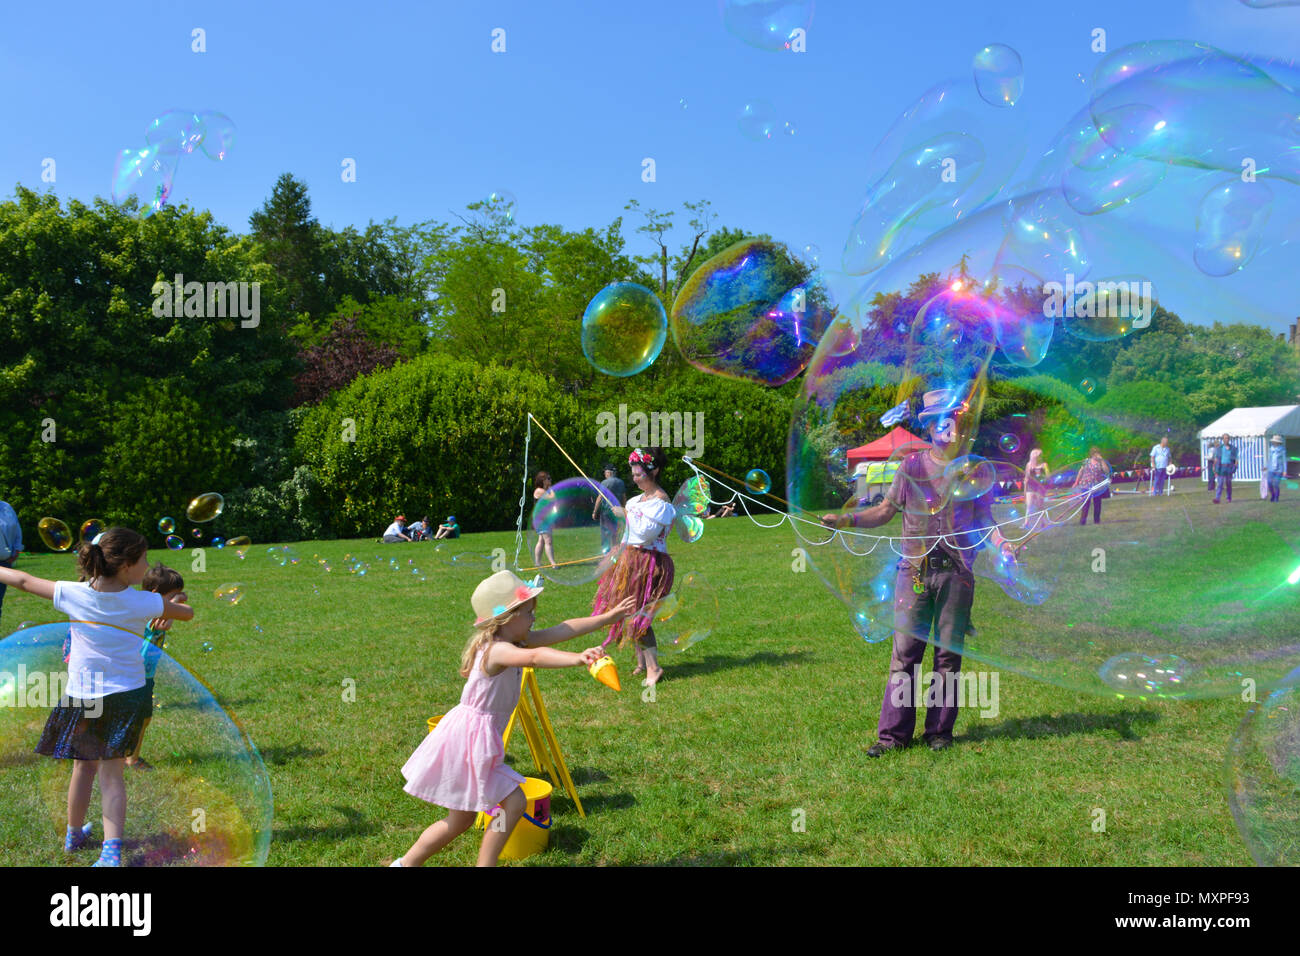 Bubblemania making soap bubbles to entertain the crowds at the annual Sherborne Castle Country Fair, Sherborne, Dorset, England. Stock Photo